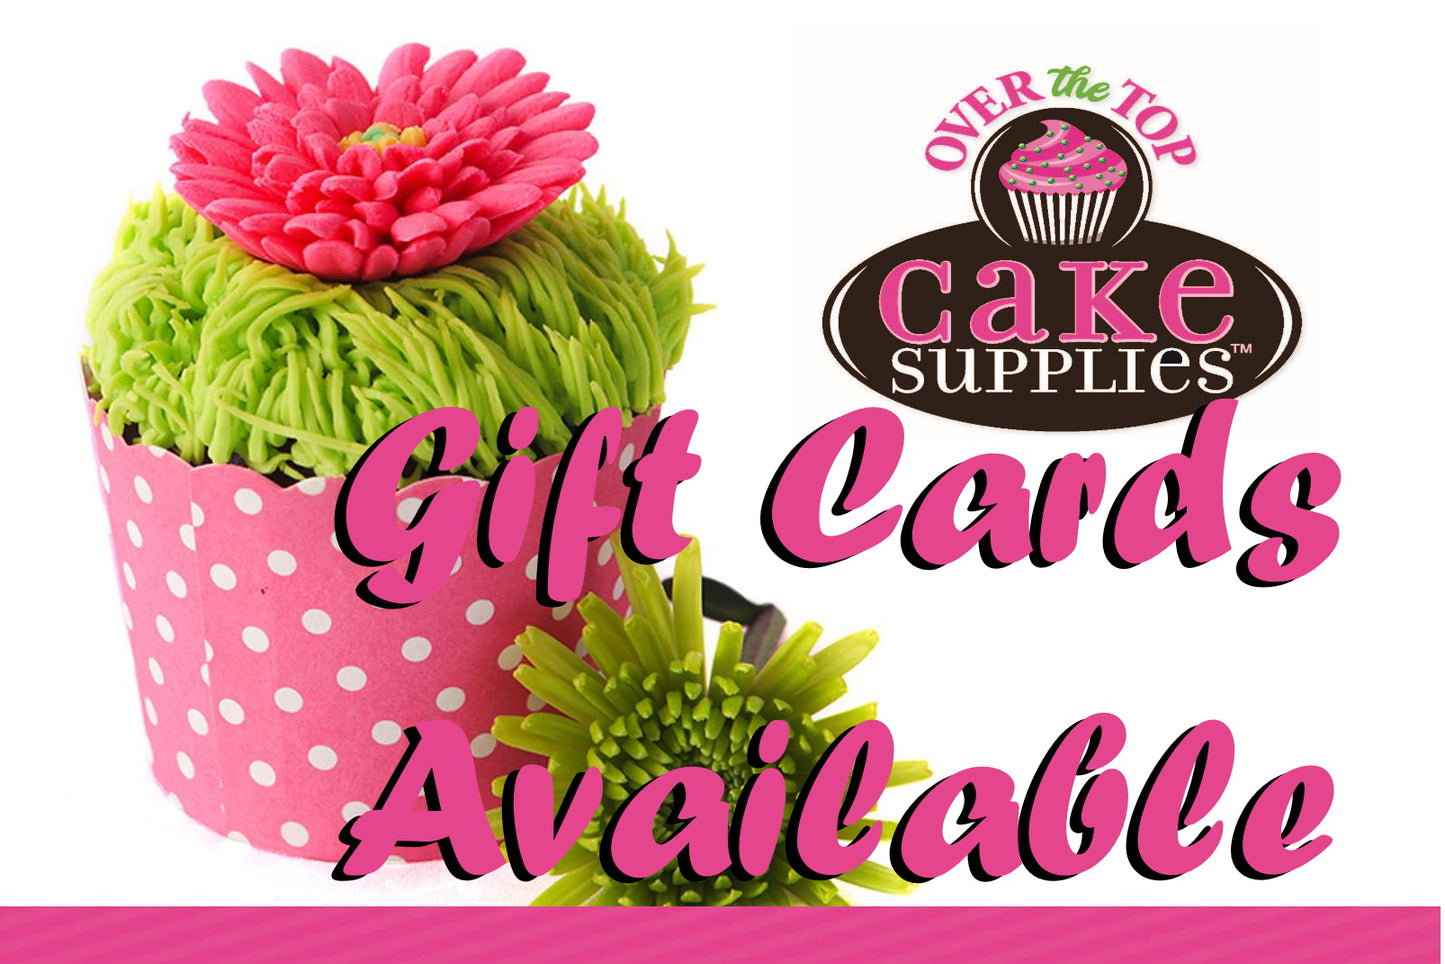 Over The Top Cake Supplies - The Woodlands Gift Card